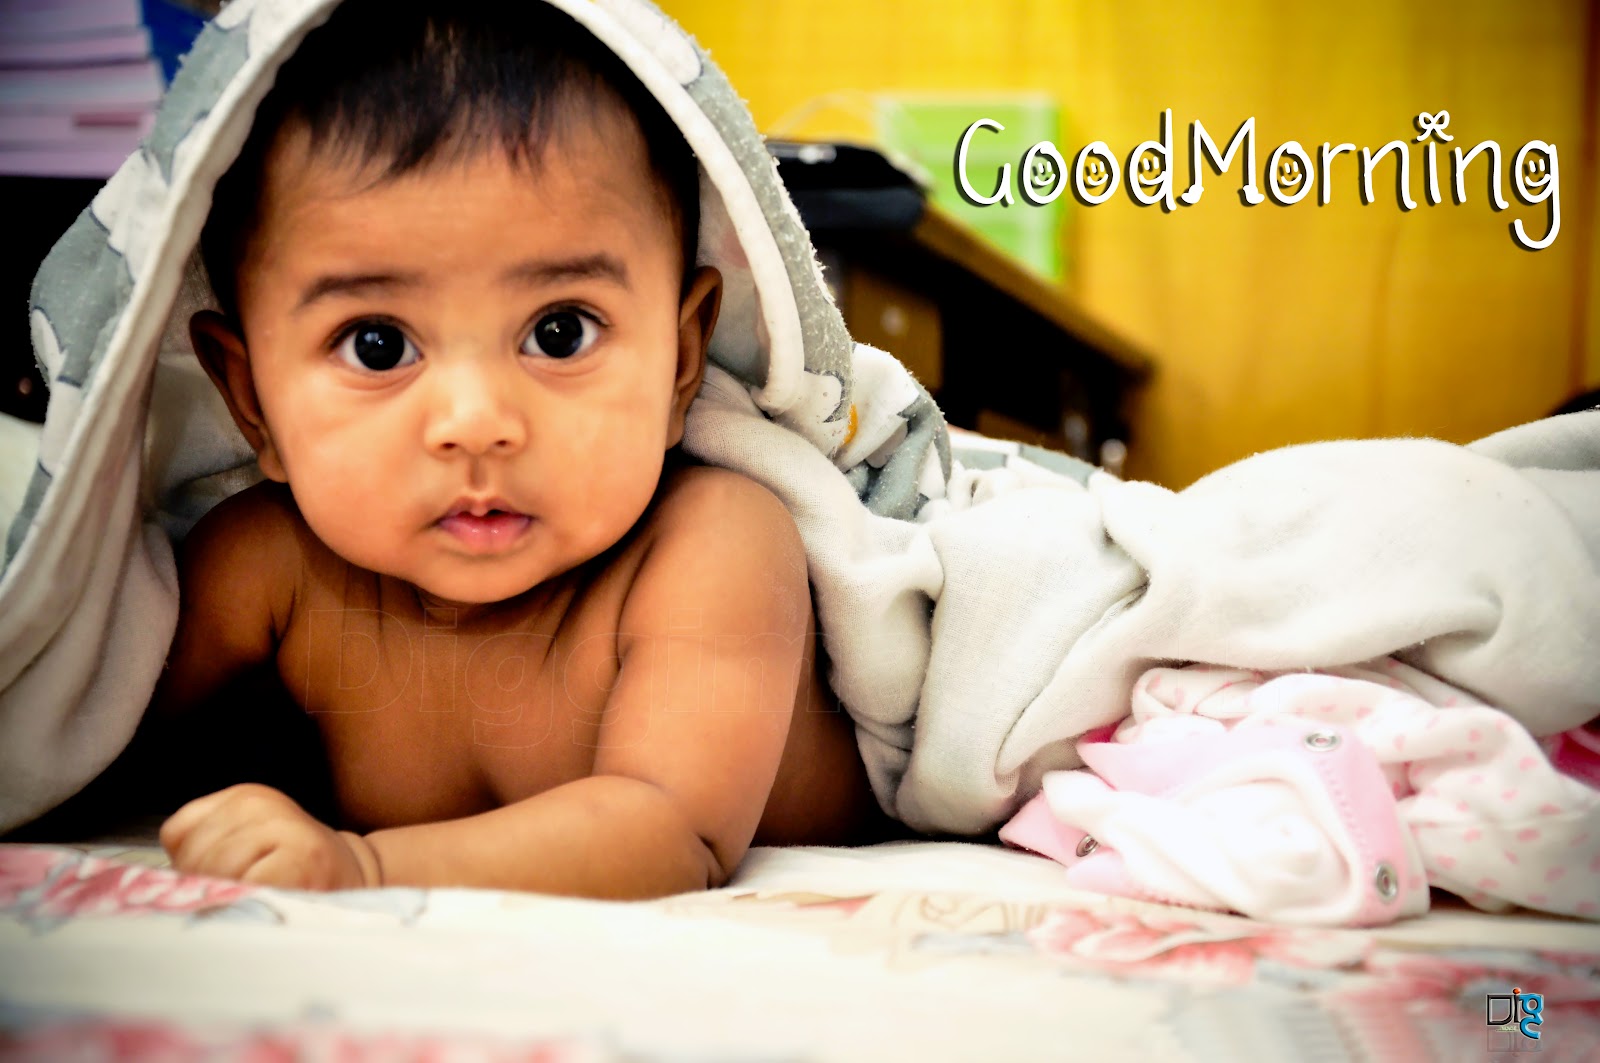 Good Morning BaBy Cute Greetings free scraps and wallpapers